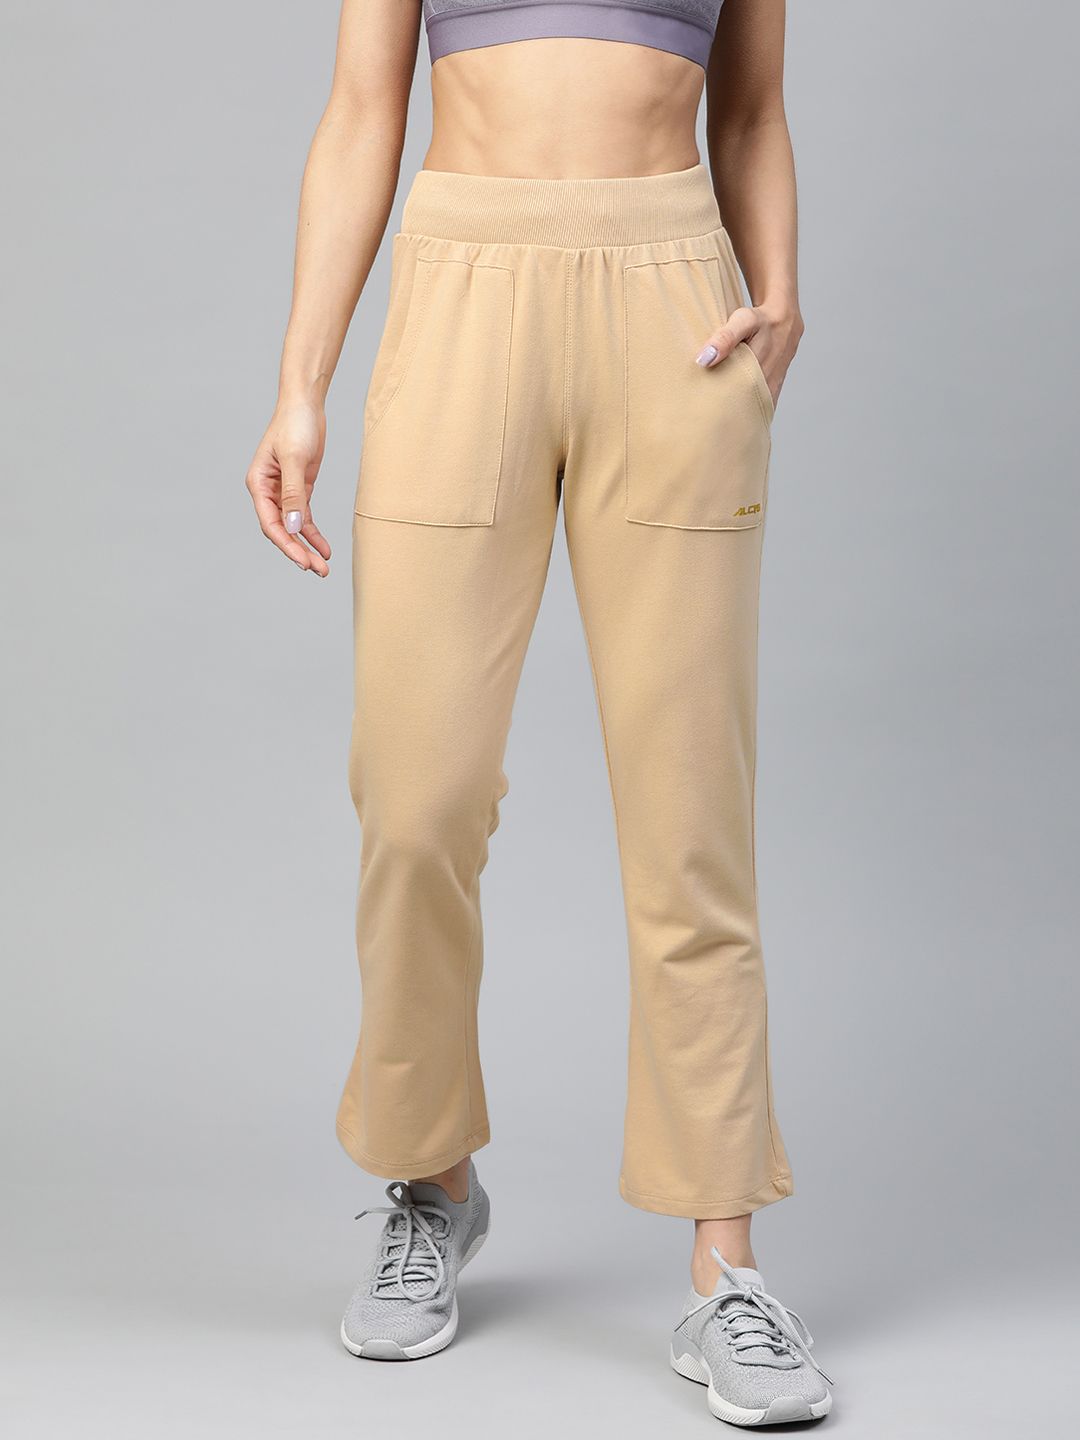 Alcis Women Beige Solid Yoga Track Pants Price in India